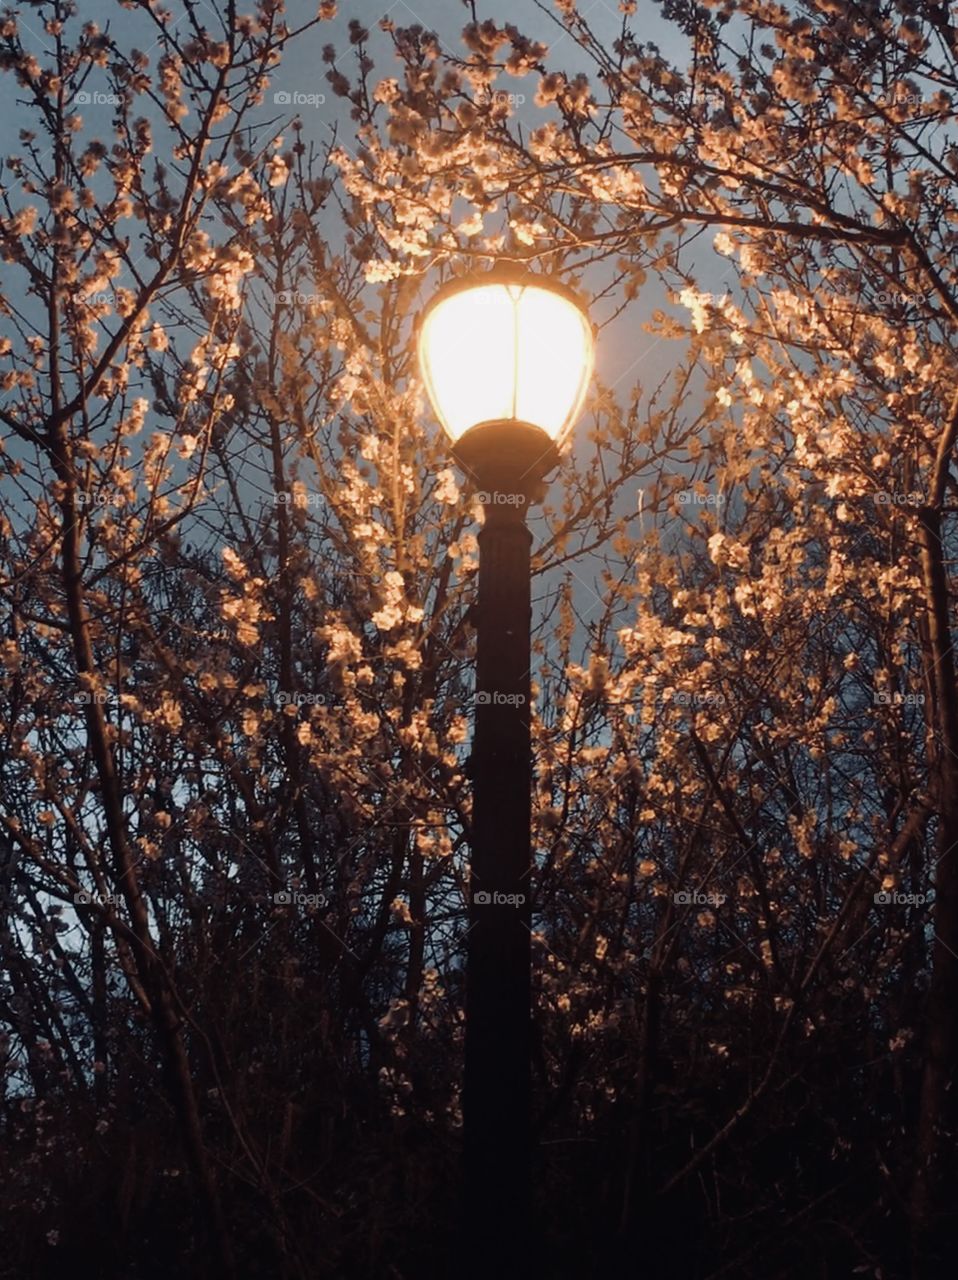 When the Street Lamps come on at Dusk